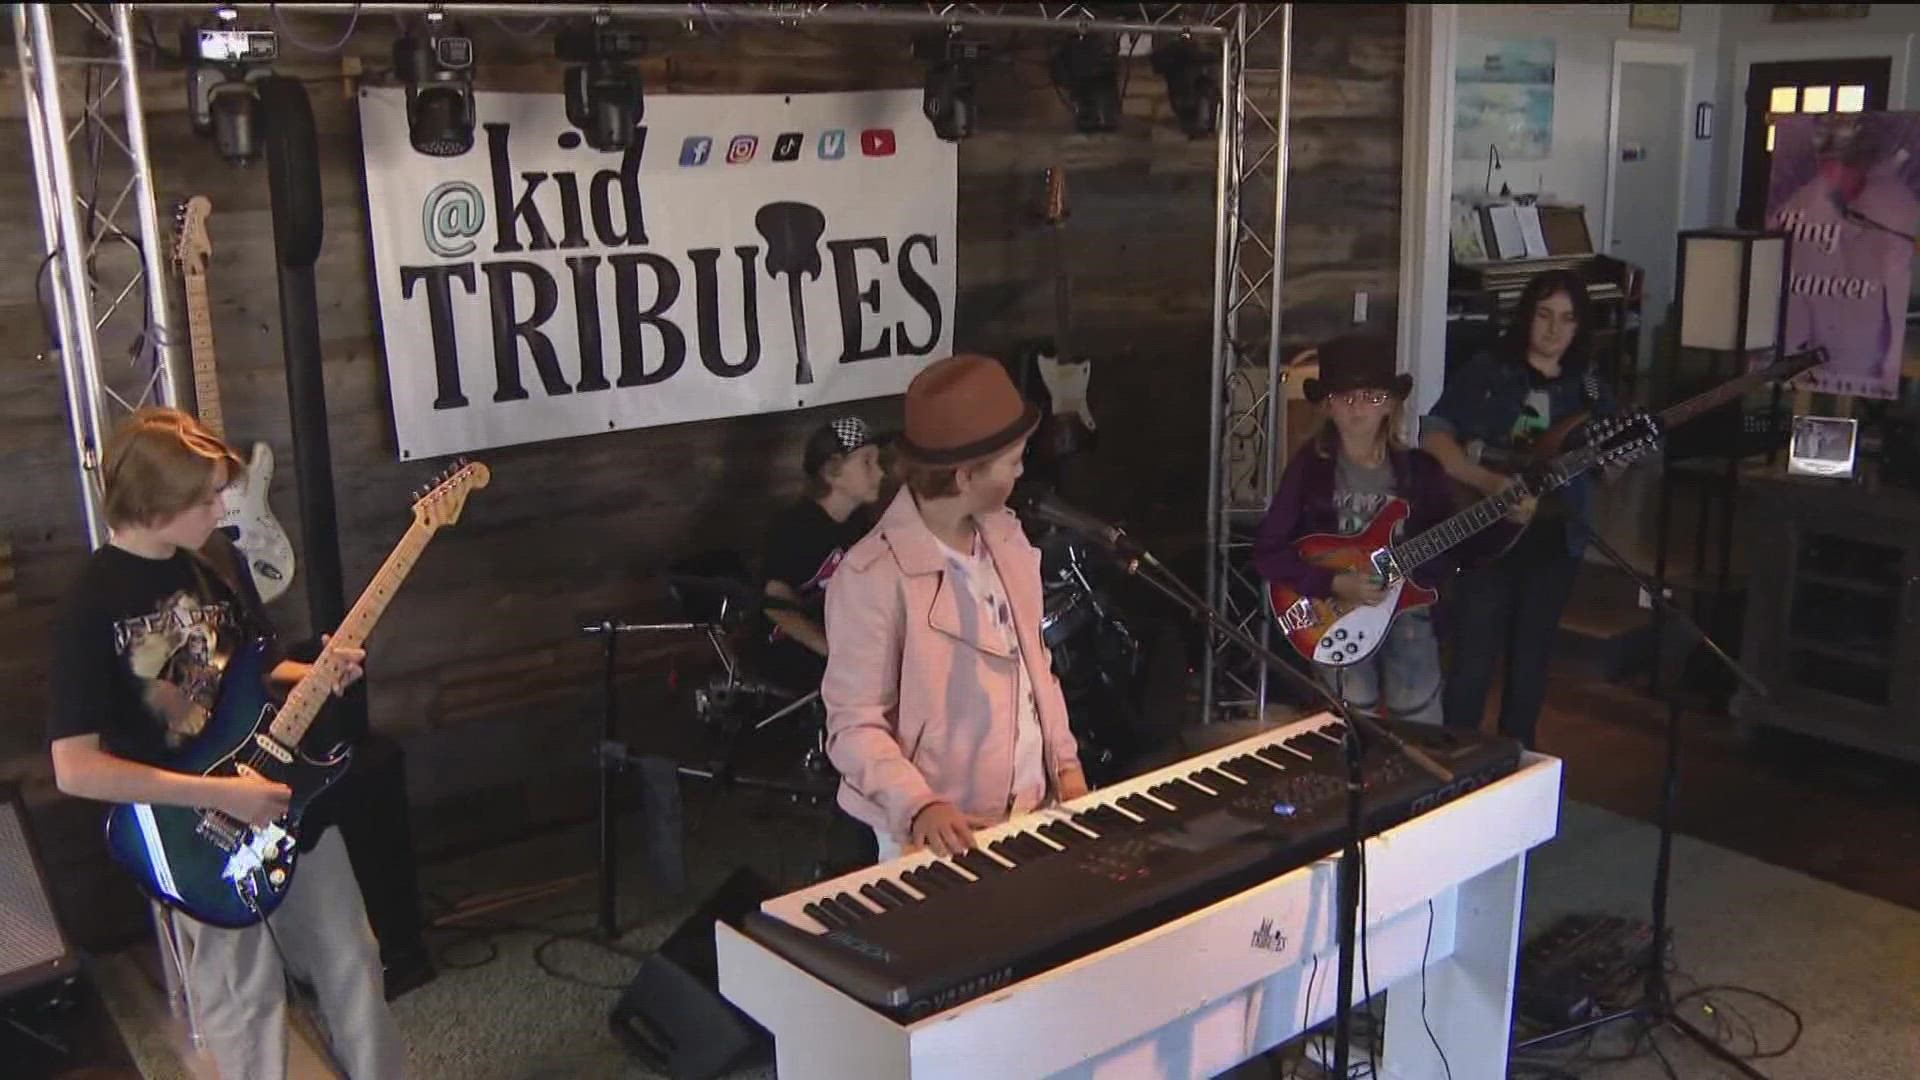 The kid band that plays Tom Petty, Elton John and Hall & Oates is now adult free.